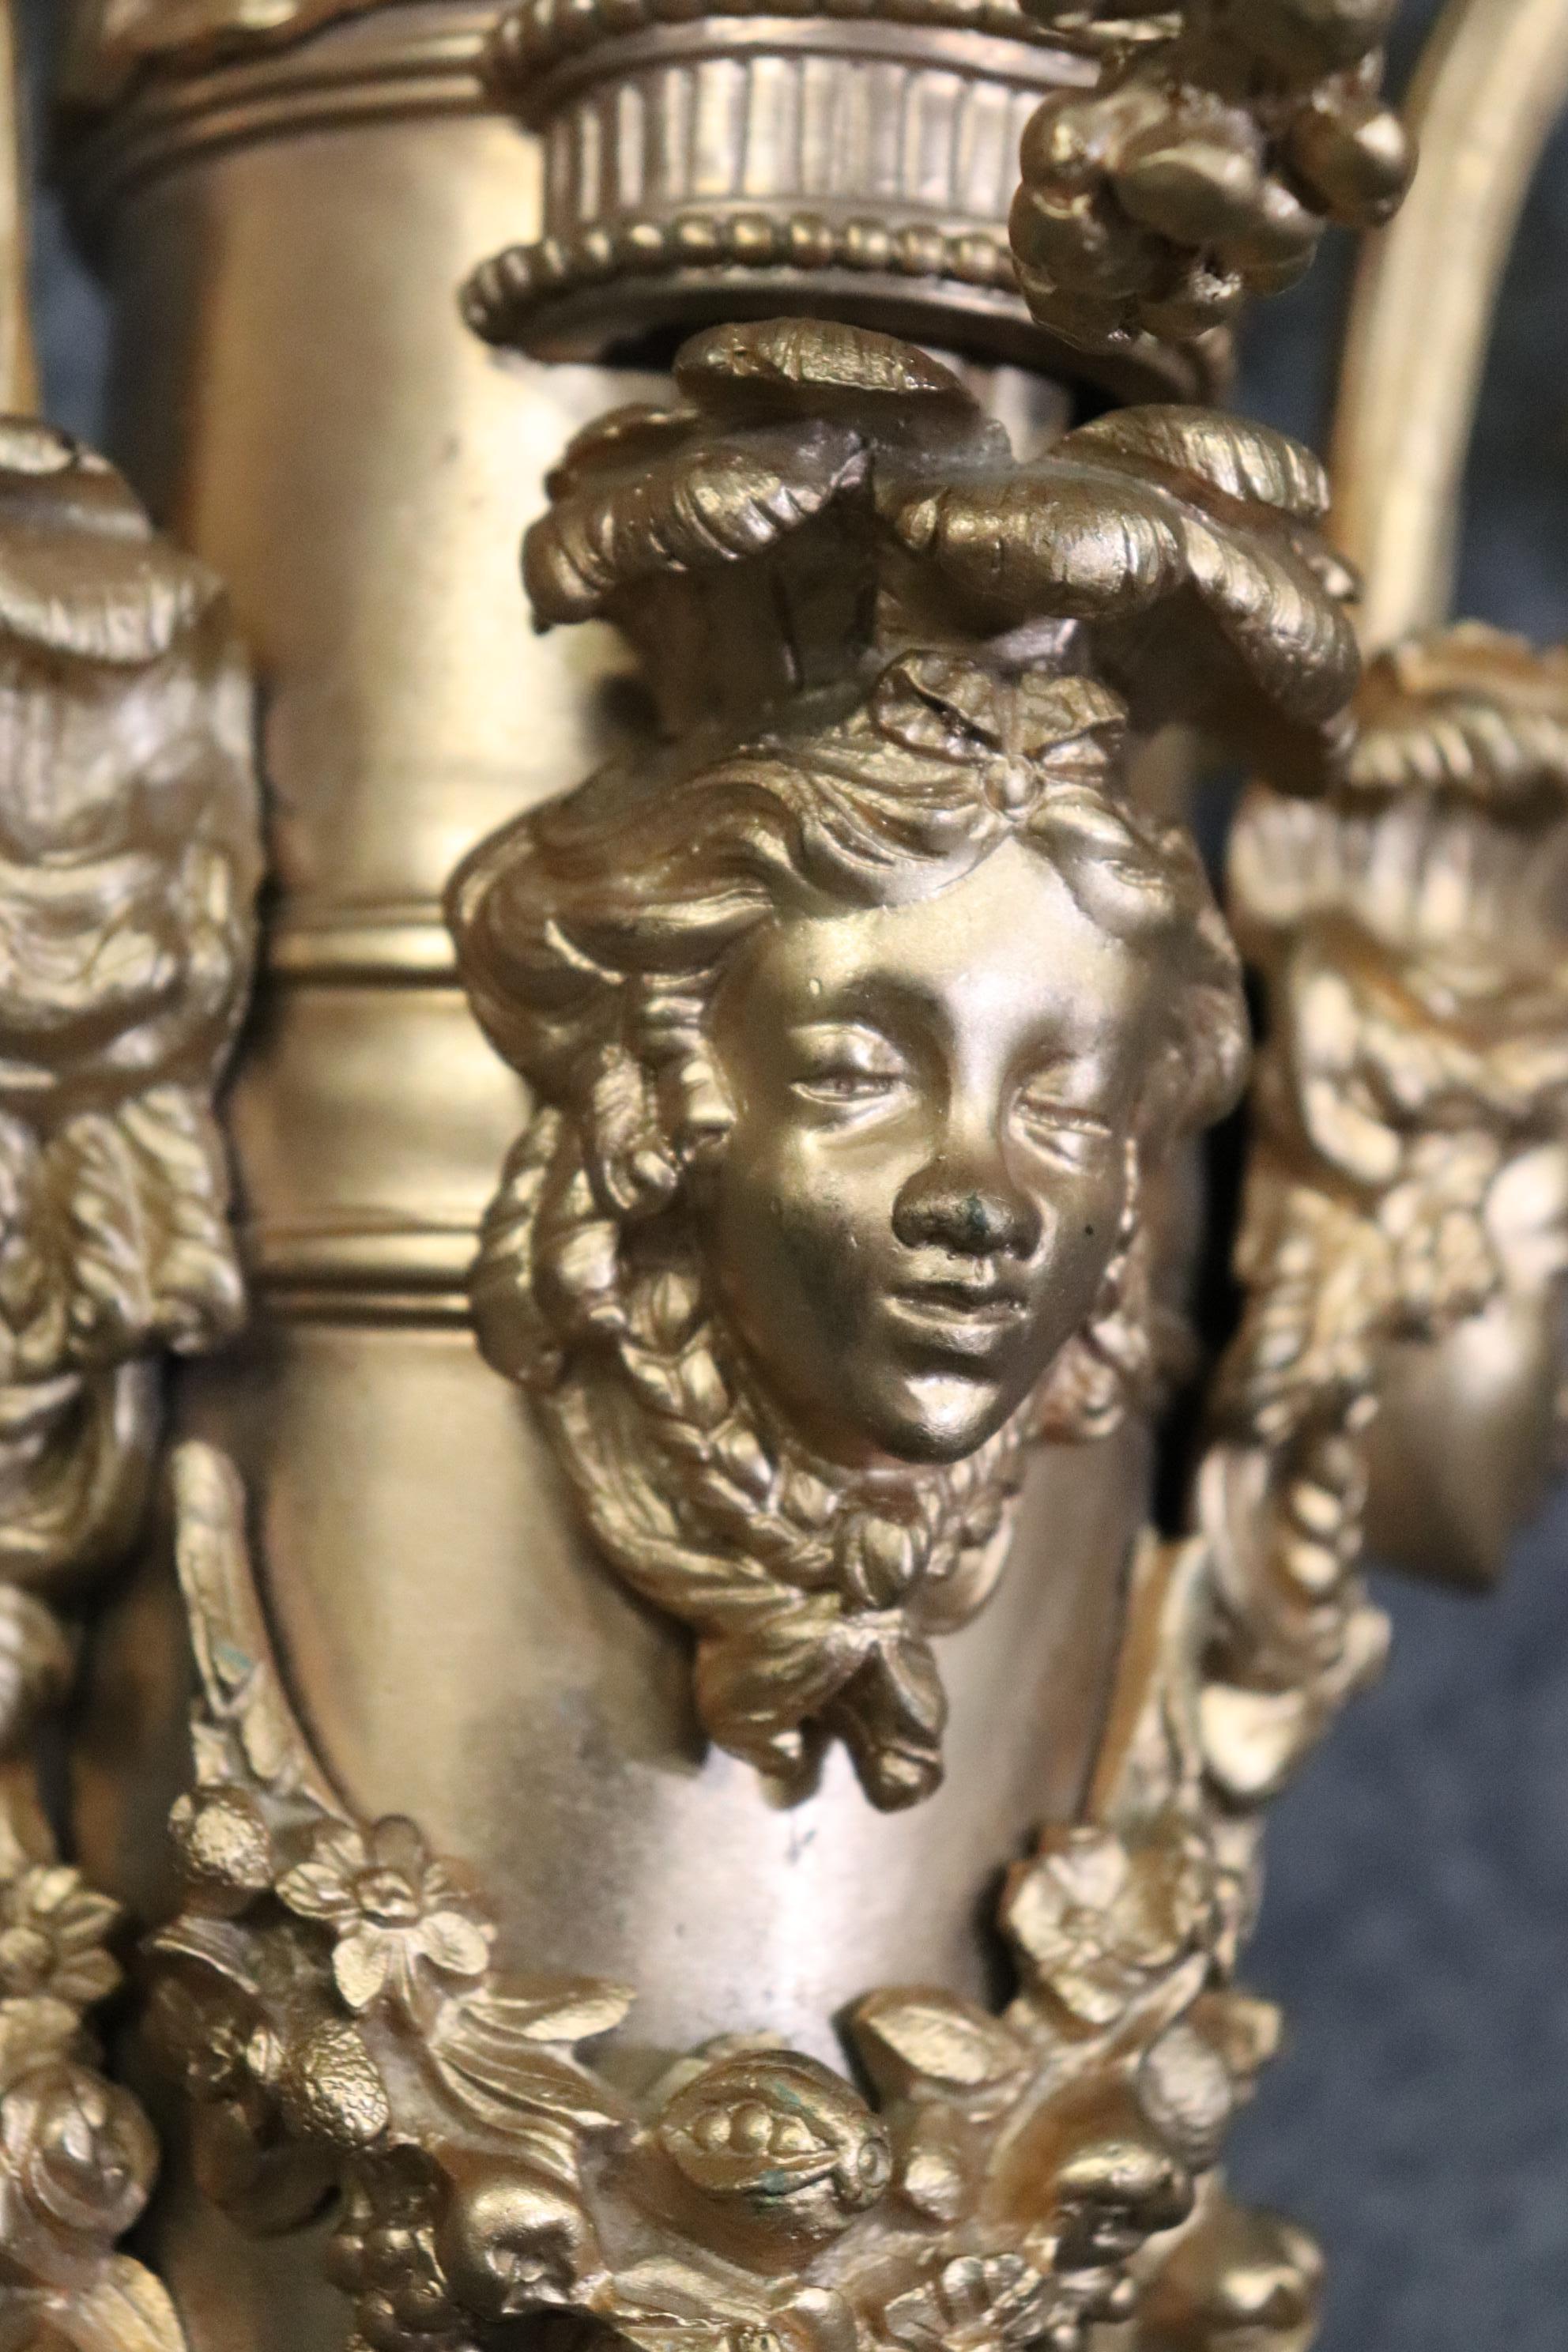 This is an outstanding figural bronze 5 light pair of sconces of huge size and incredible casting quality. The sconces are incredibly well done, the realistic foliate and figural carving is exquisite and has a nice patina. The sconces are wired and